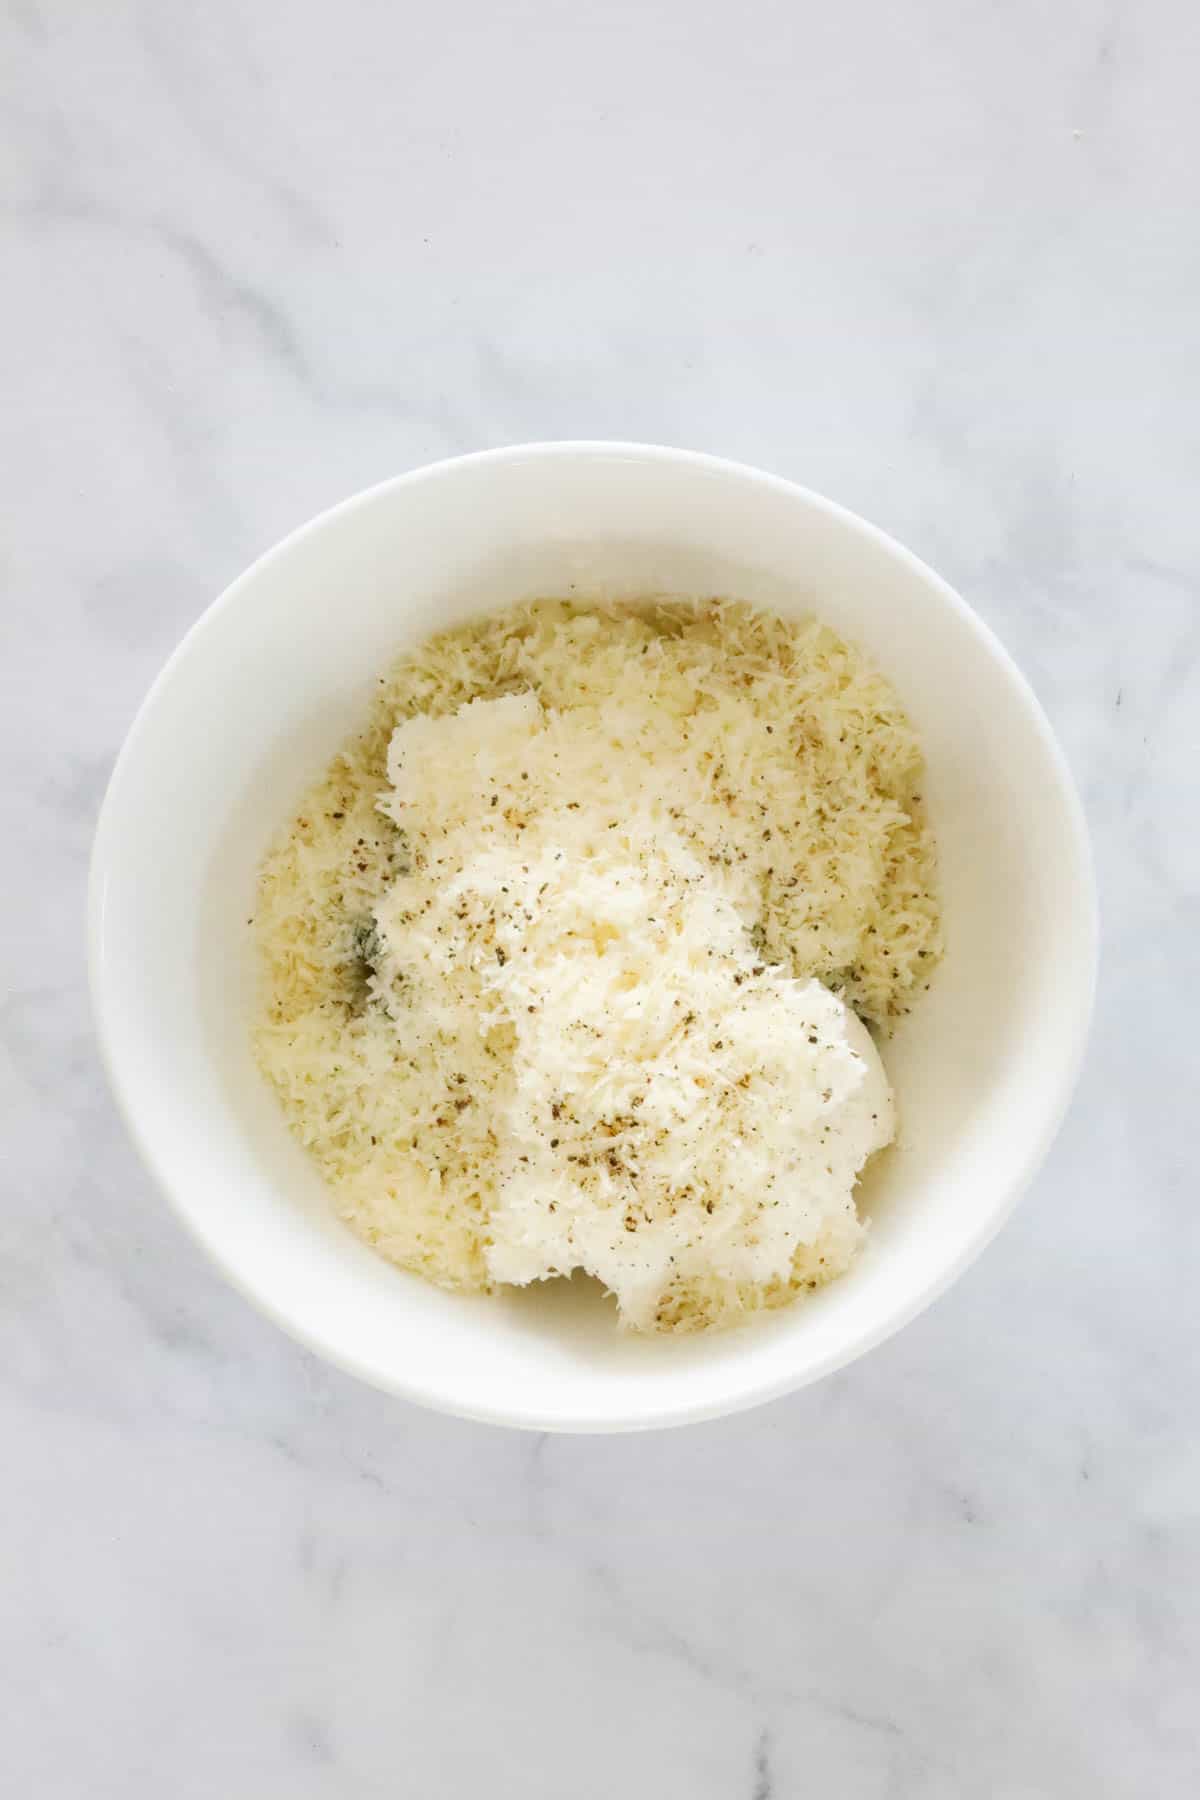 Ricotta and parmesan in a white mixing bowl.